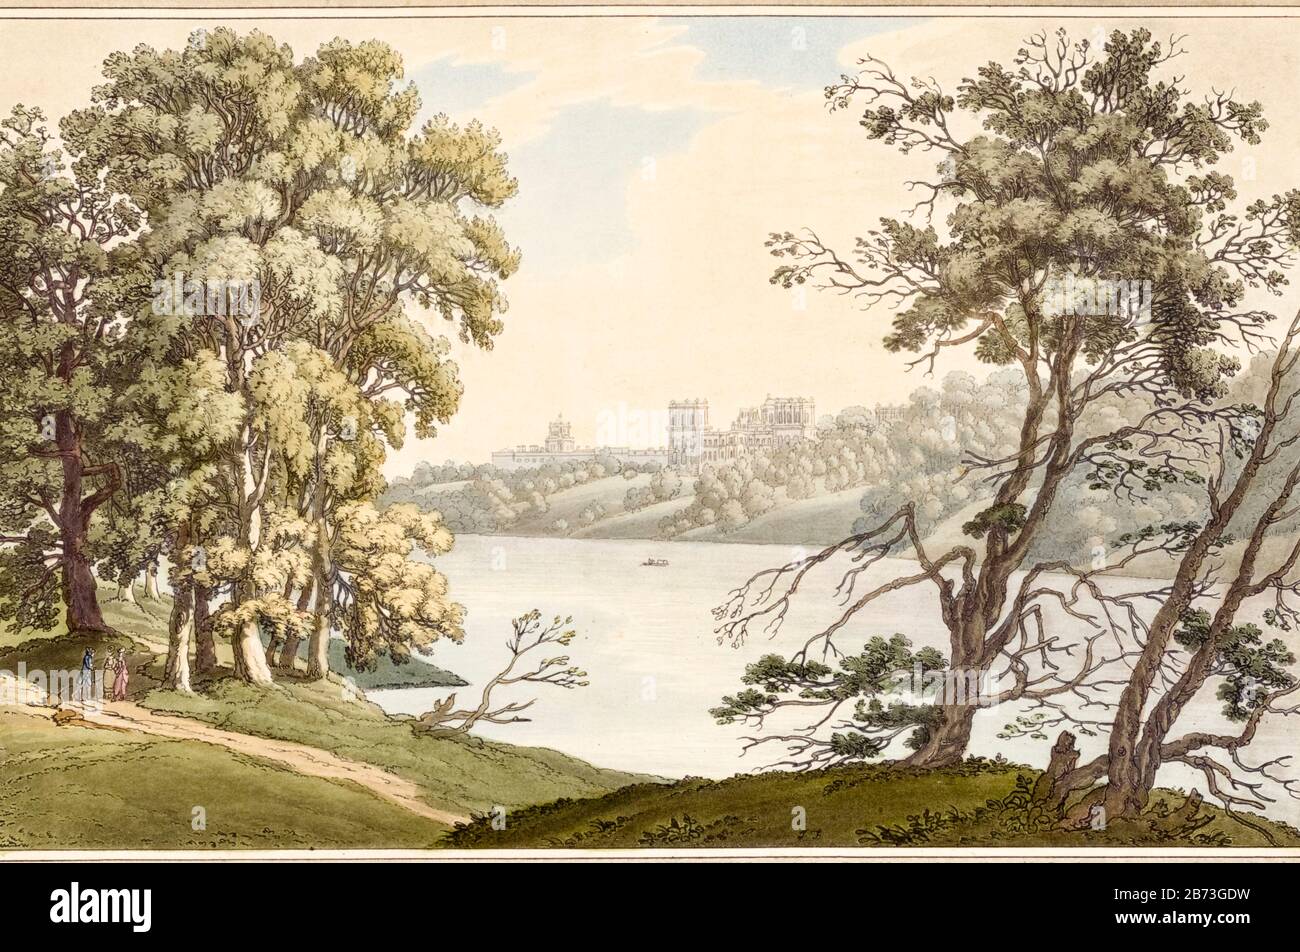 View of Blenheim Palace across the lake, 18th Century illustration by JC Stadler, 1793 Stock Photo